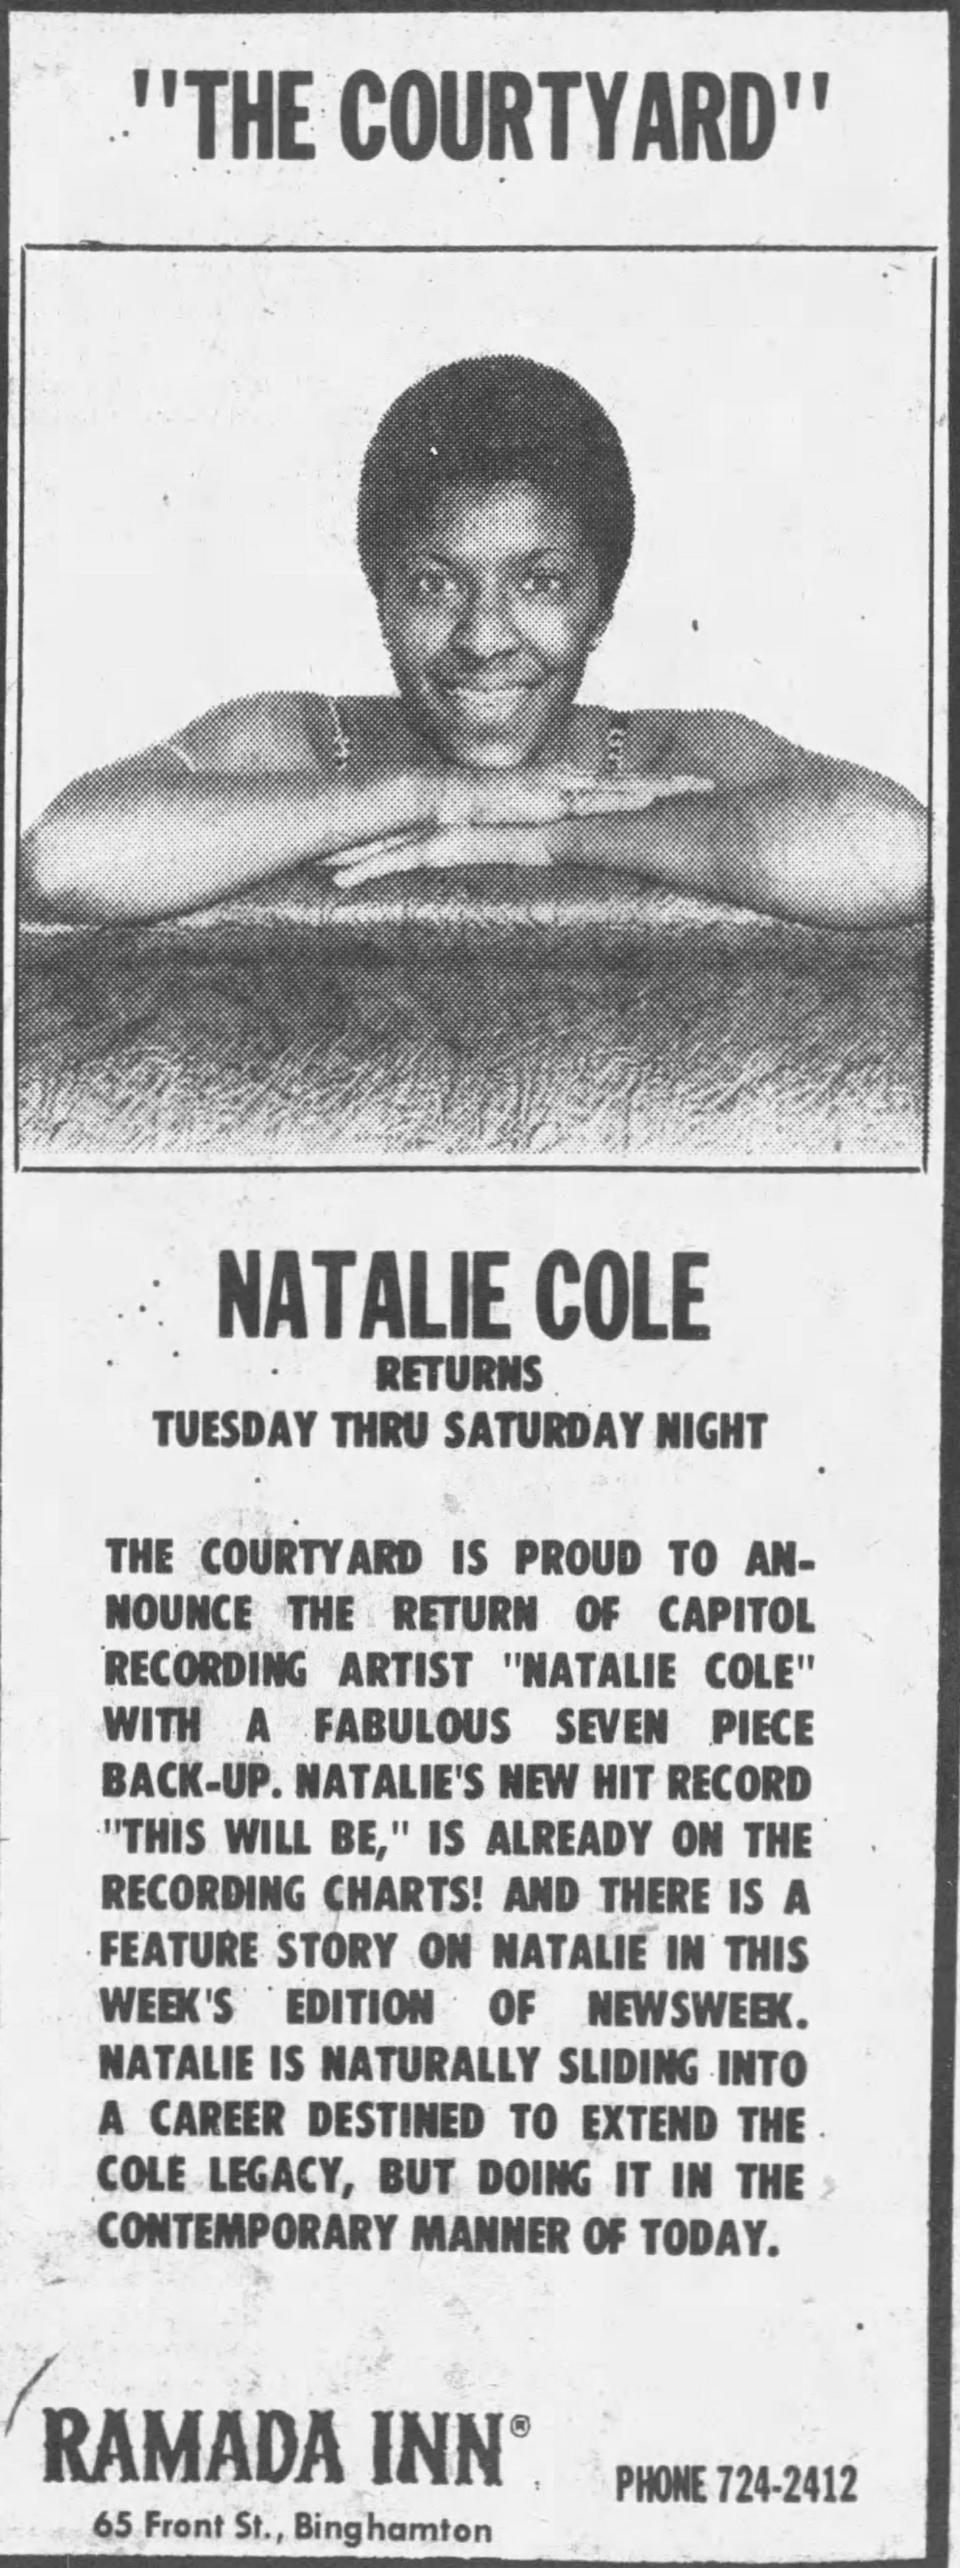 The ad for the return of Natalie Cole to Binghamton in February 1976.